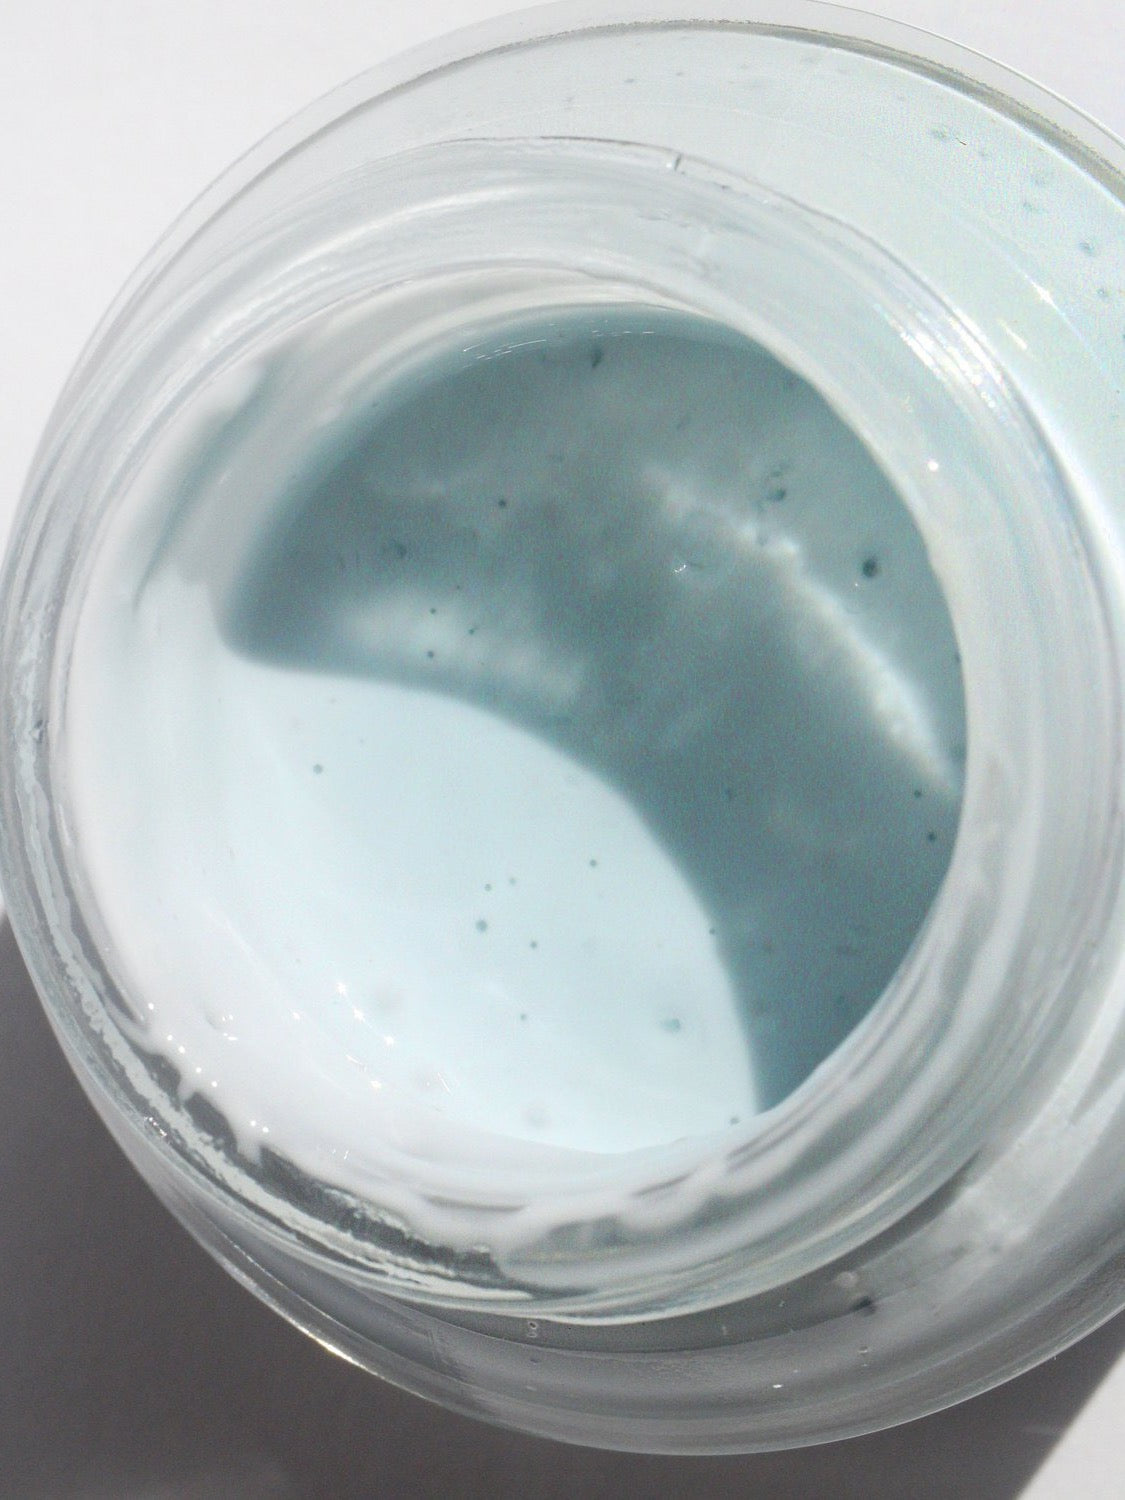 A jar of NOTO Moisture Riser Cream sitting on top of a white surface.